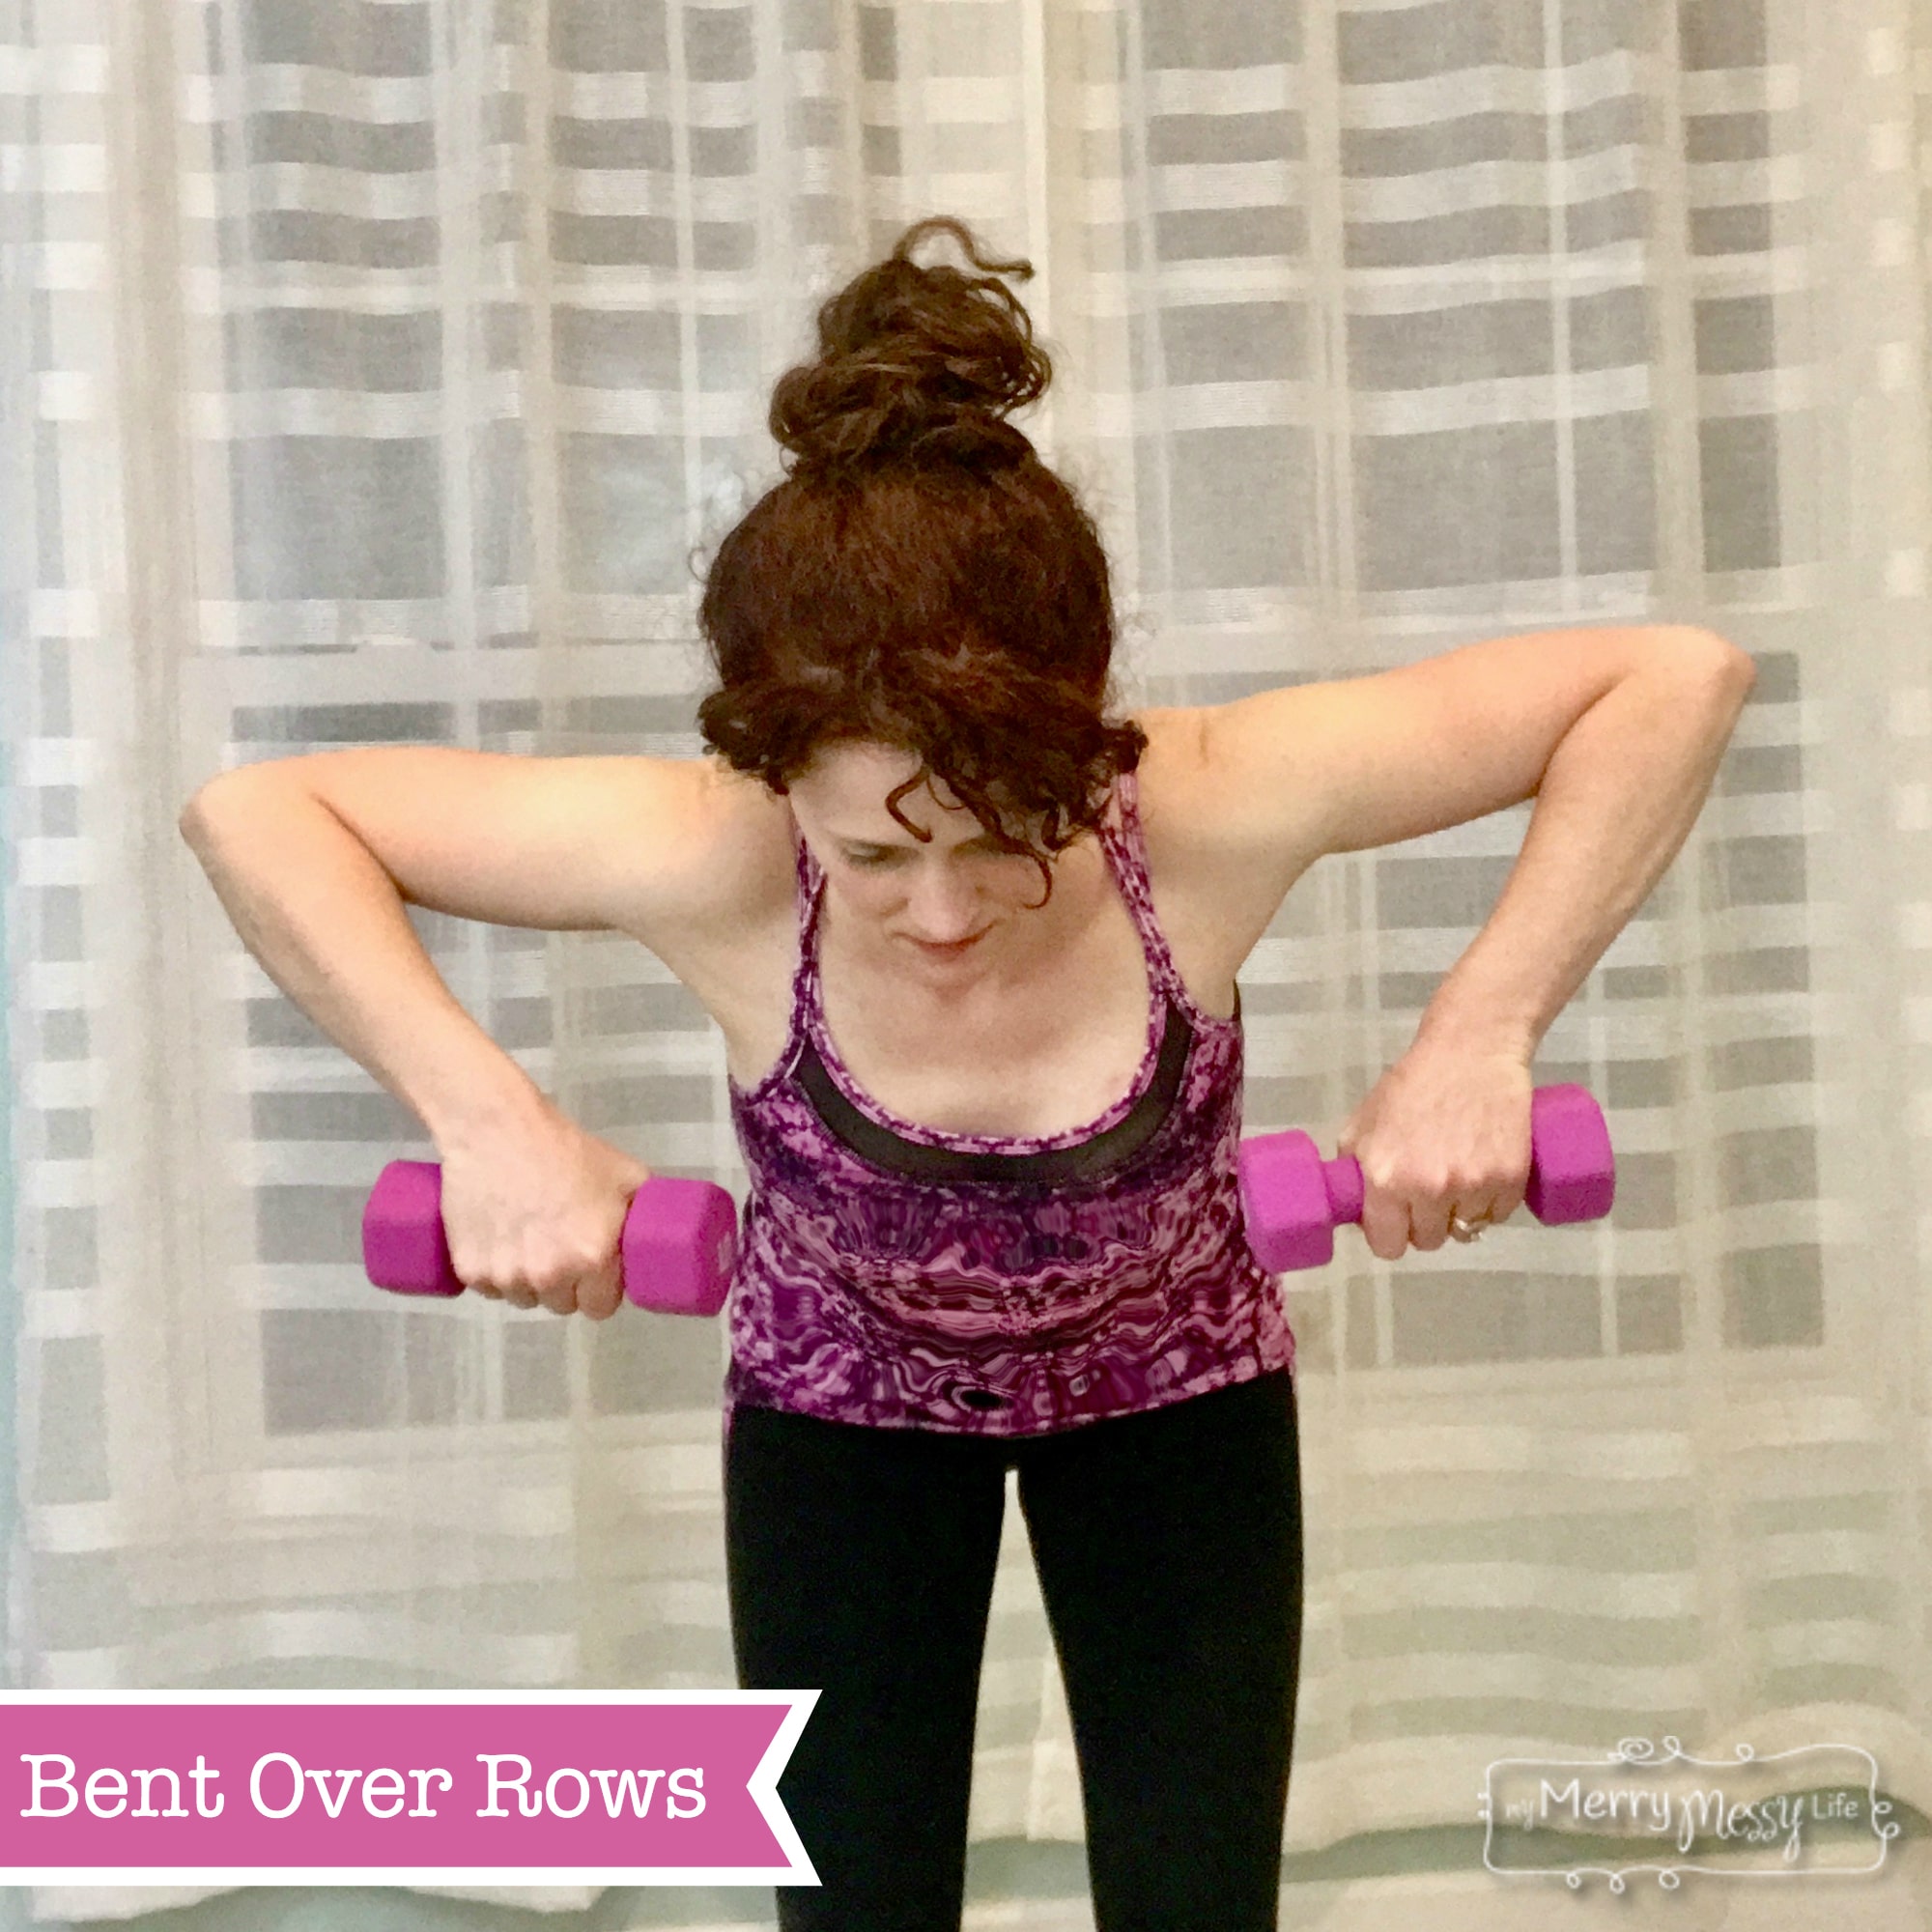 Upper Body Exercises - Bent Over Rows - part of a 15 min arm and back routine for sexy, strong arms and back!